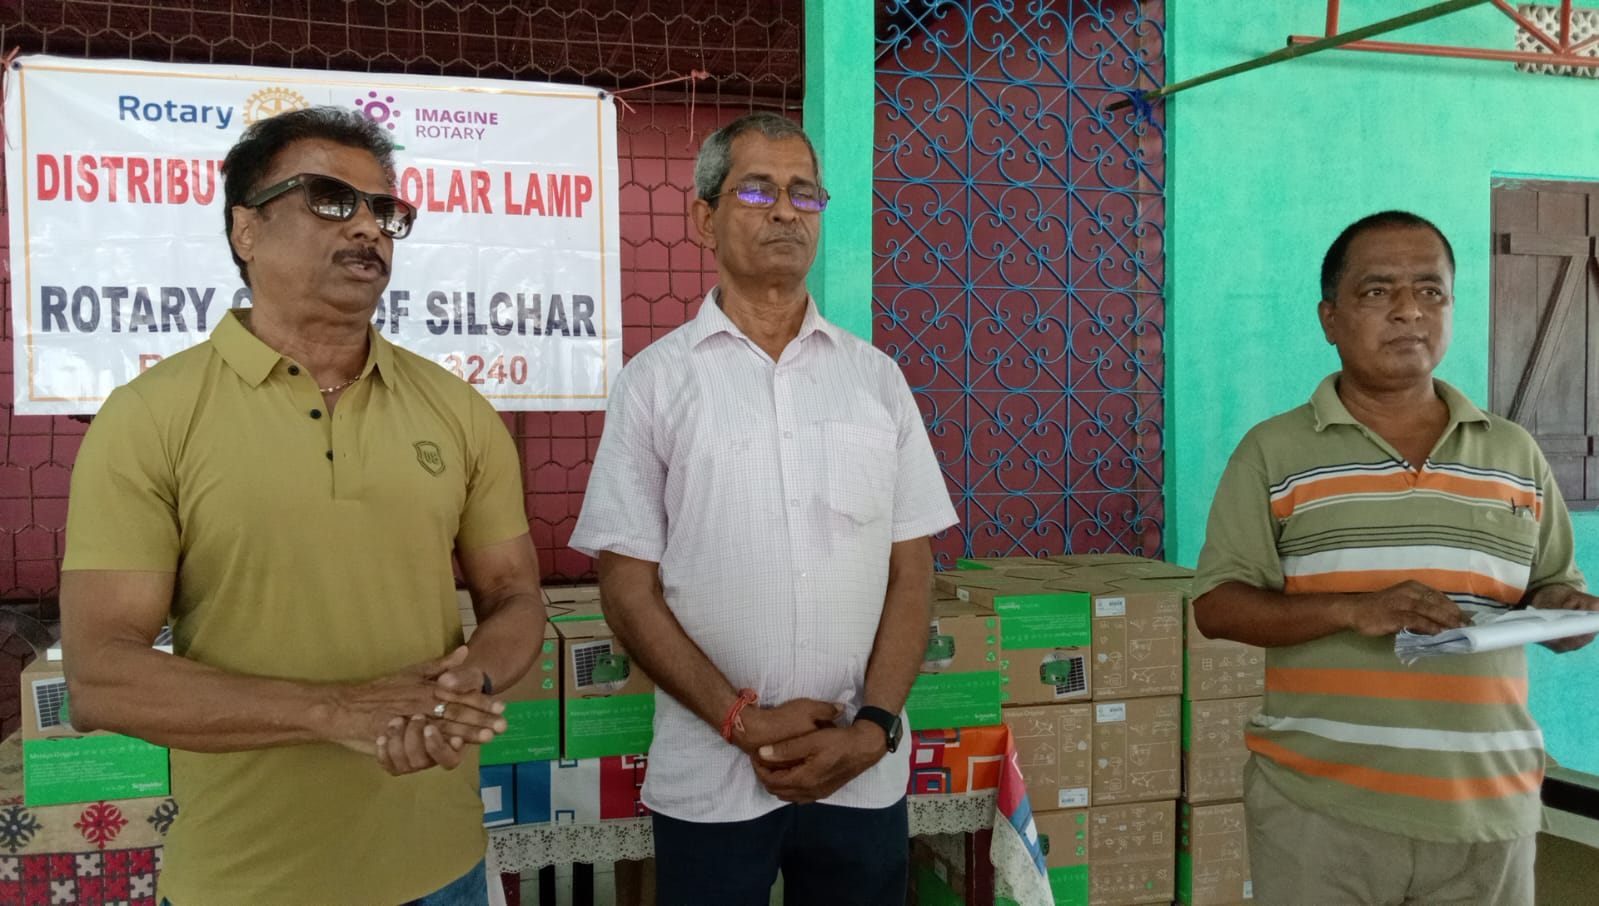 Distribution of Solar lamps